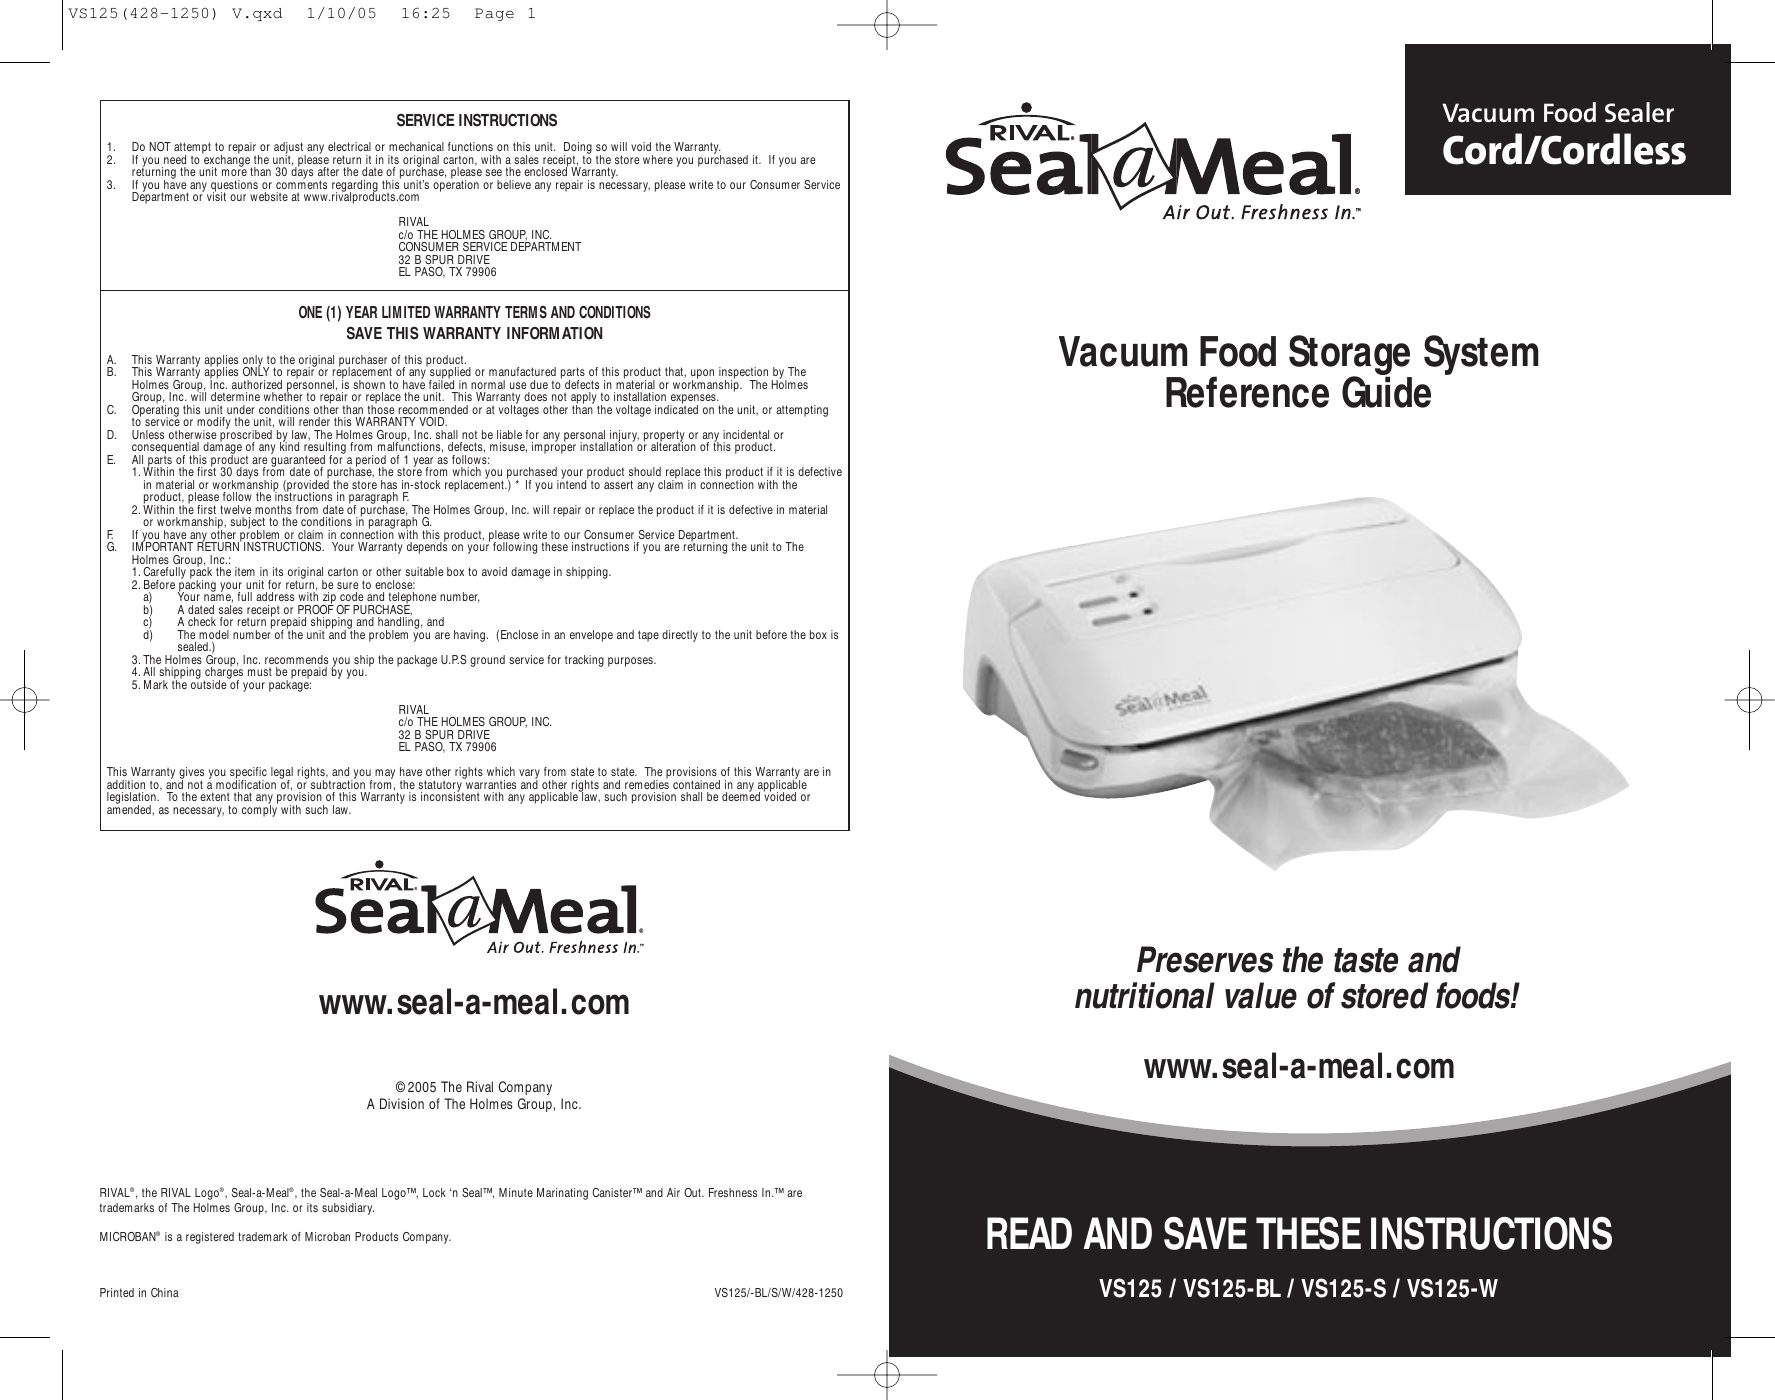 Page 1 of 8 - Seal-A-Meal Seal-A-Meal-Vs125-Users-Manual- VS125(428-1250) V  Seal-a-meal-vs125-users-manual